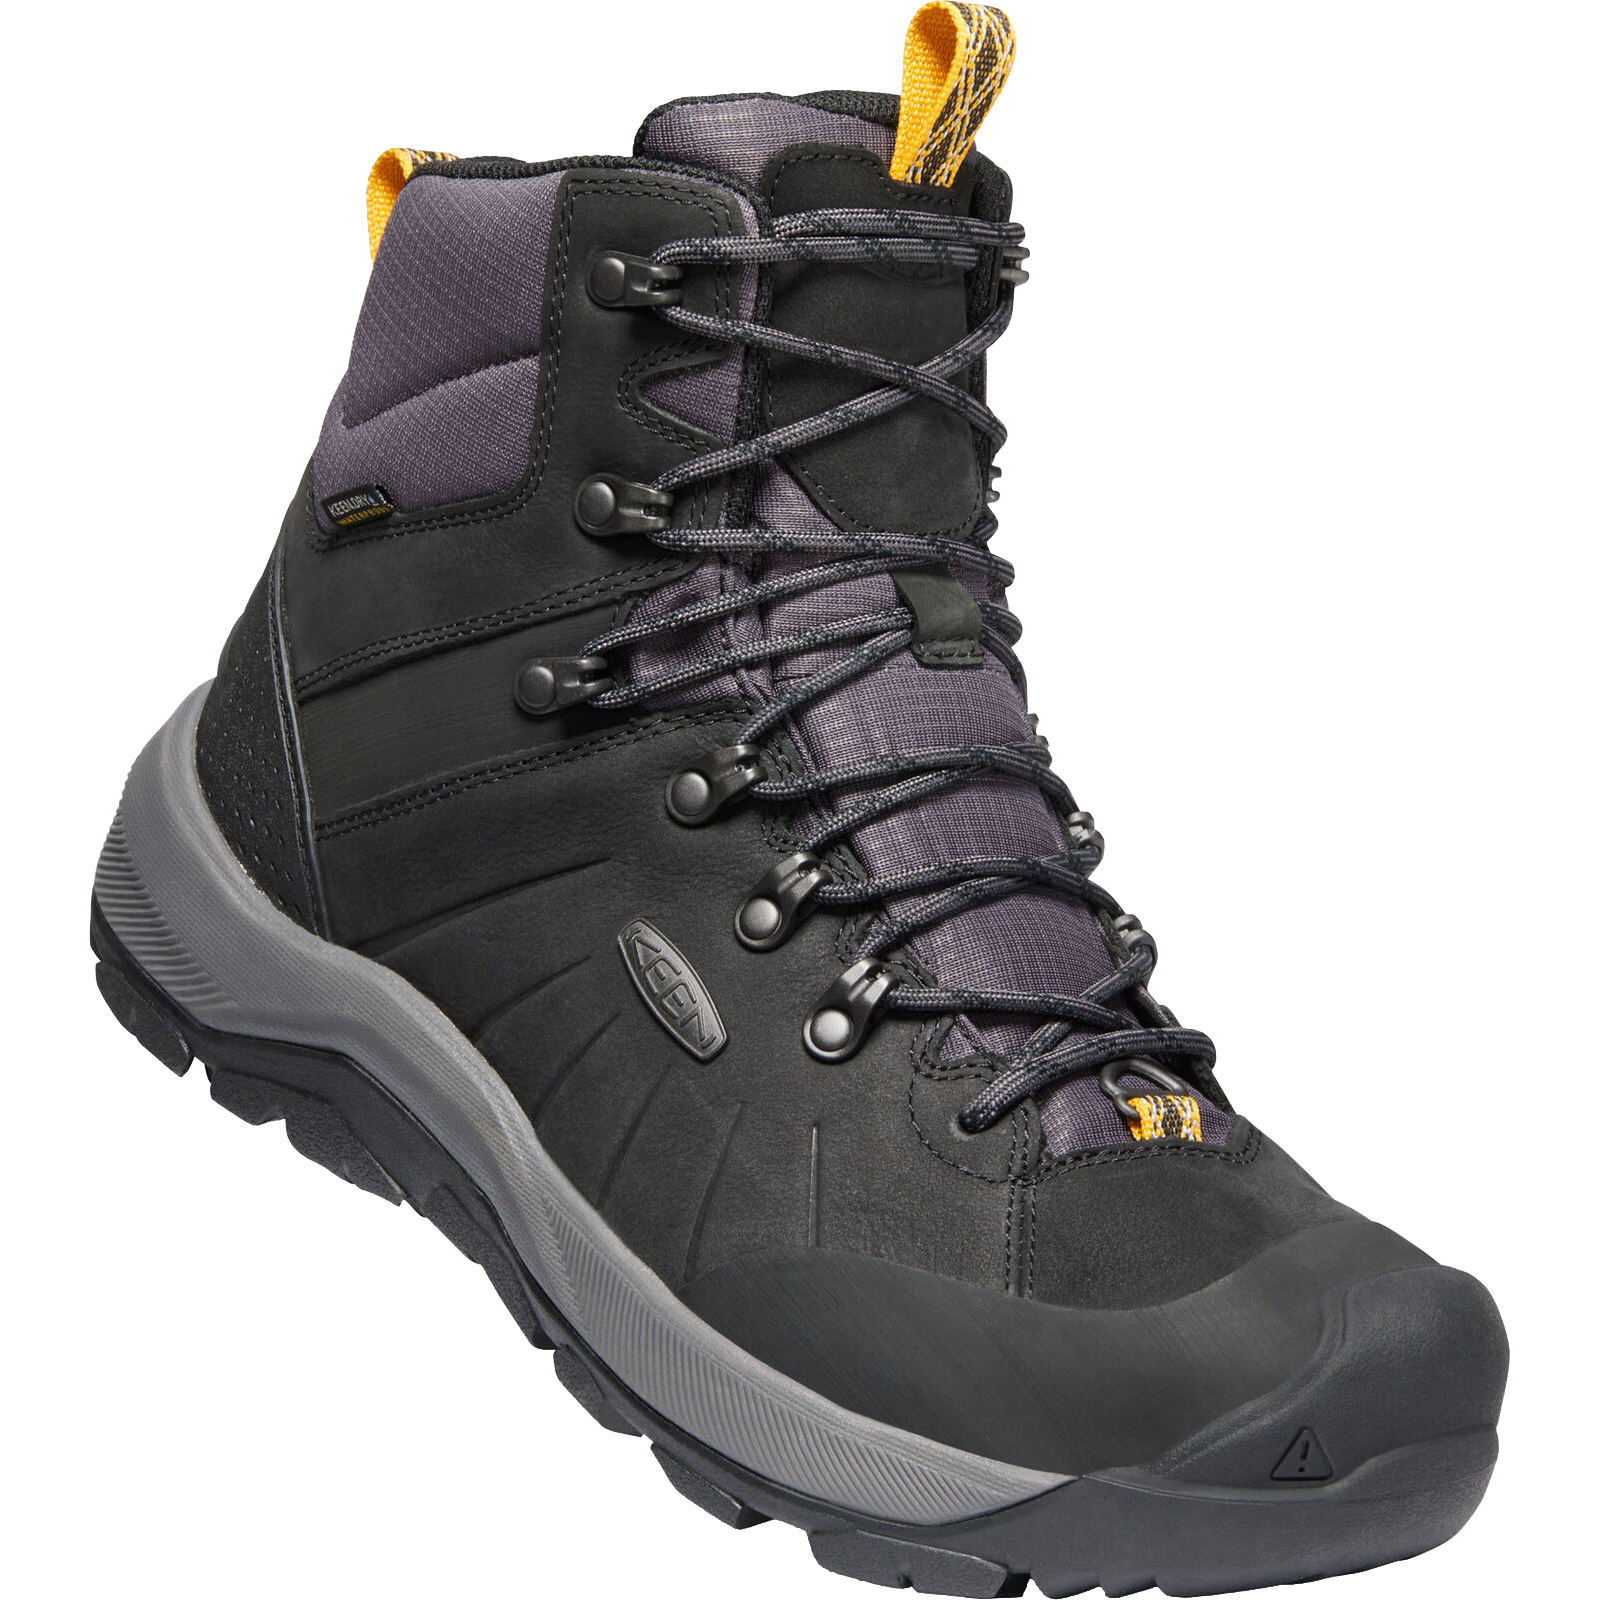 Picture of KEEN Revel IV Mid Polar Hiking Boots - Black / Magnet